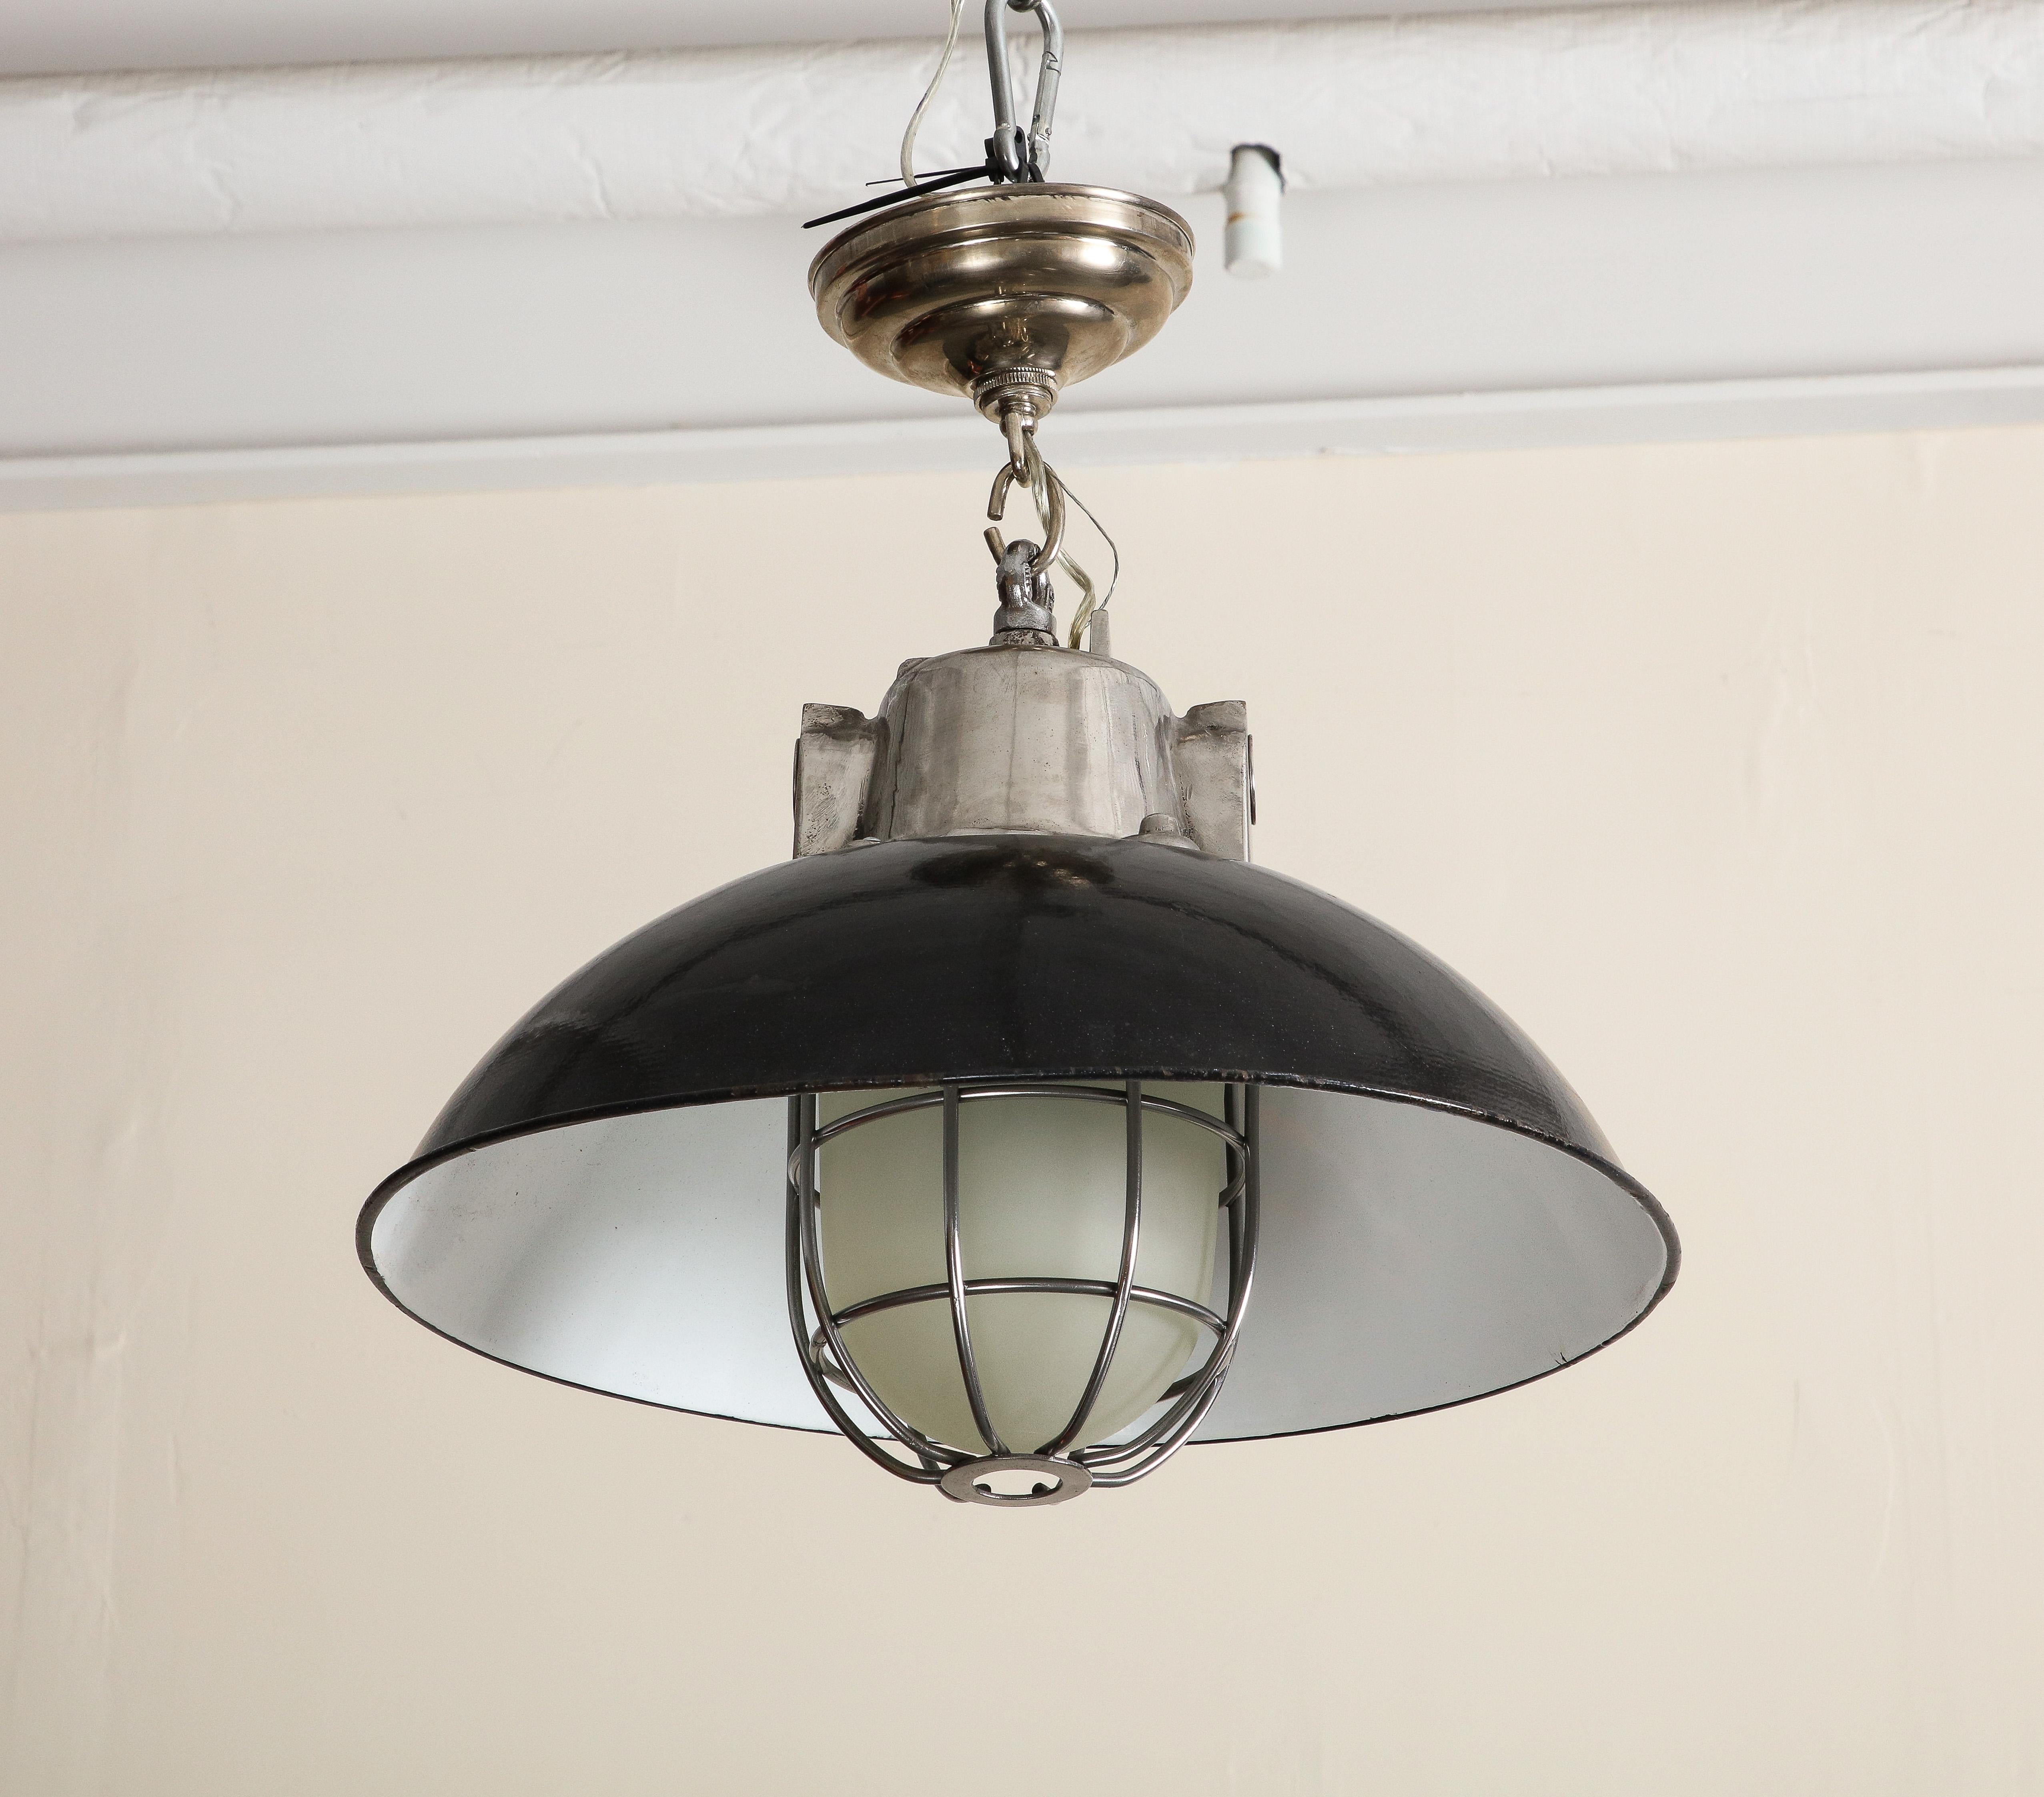 Pair of Midcentury Industrial Style Cage Pendant Lights with Black Enamel Shade For Sale 2